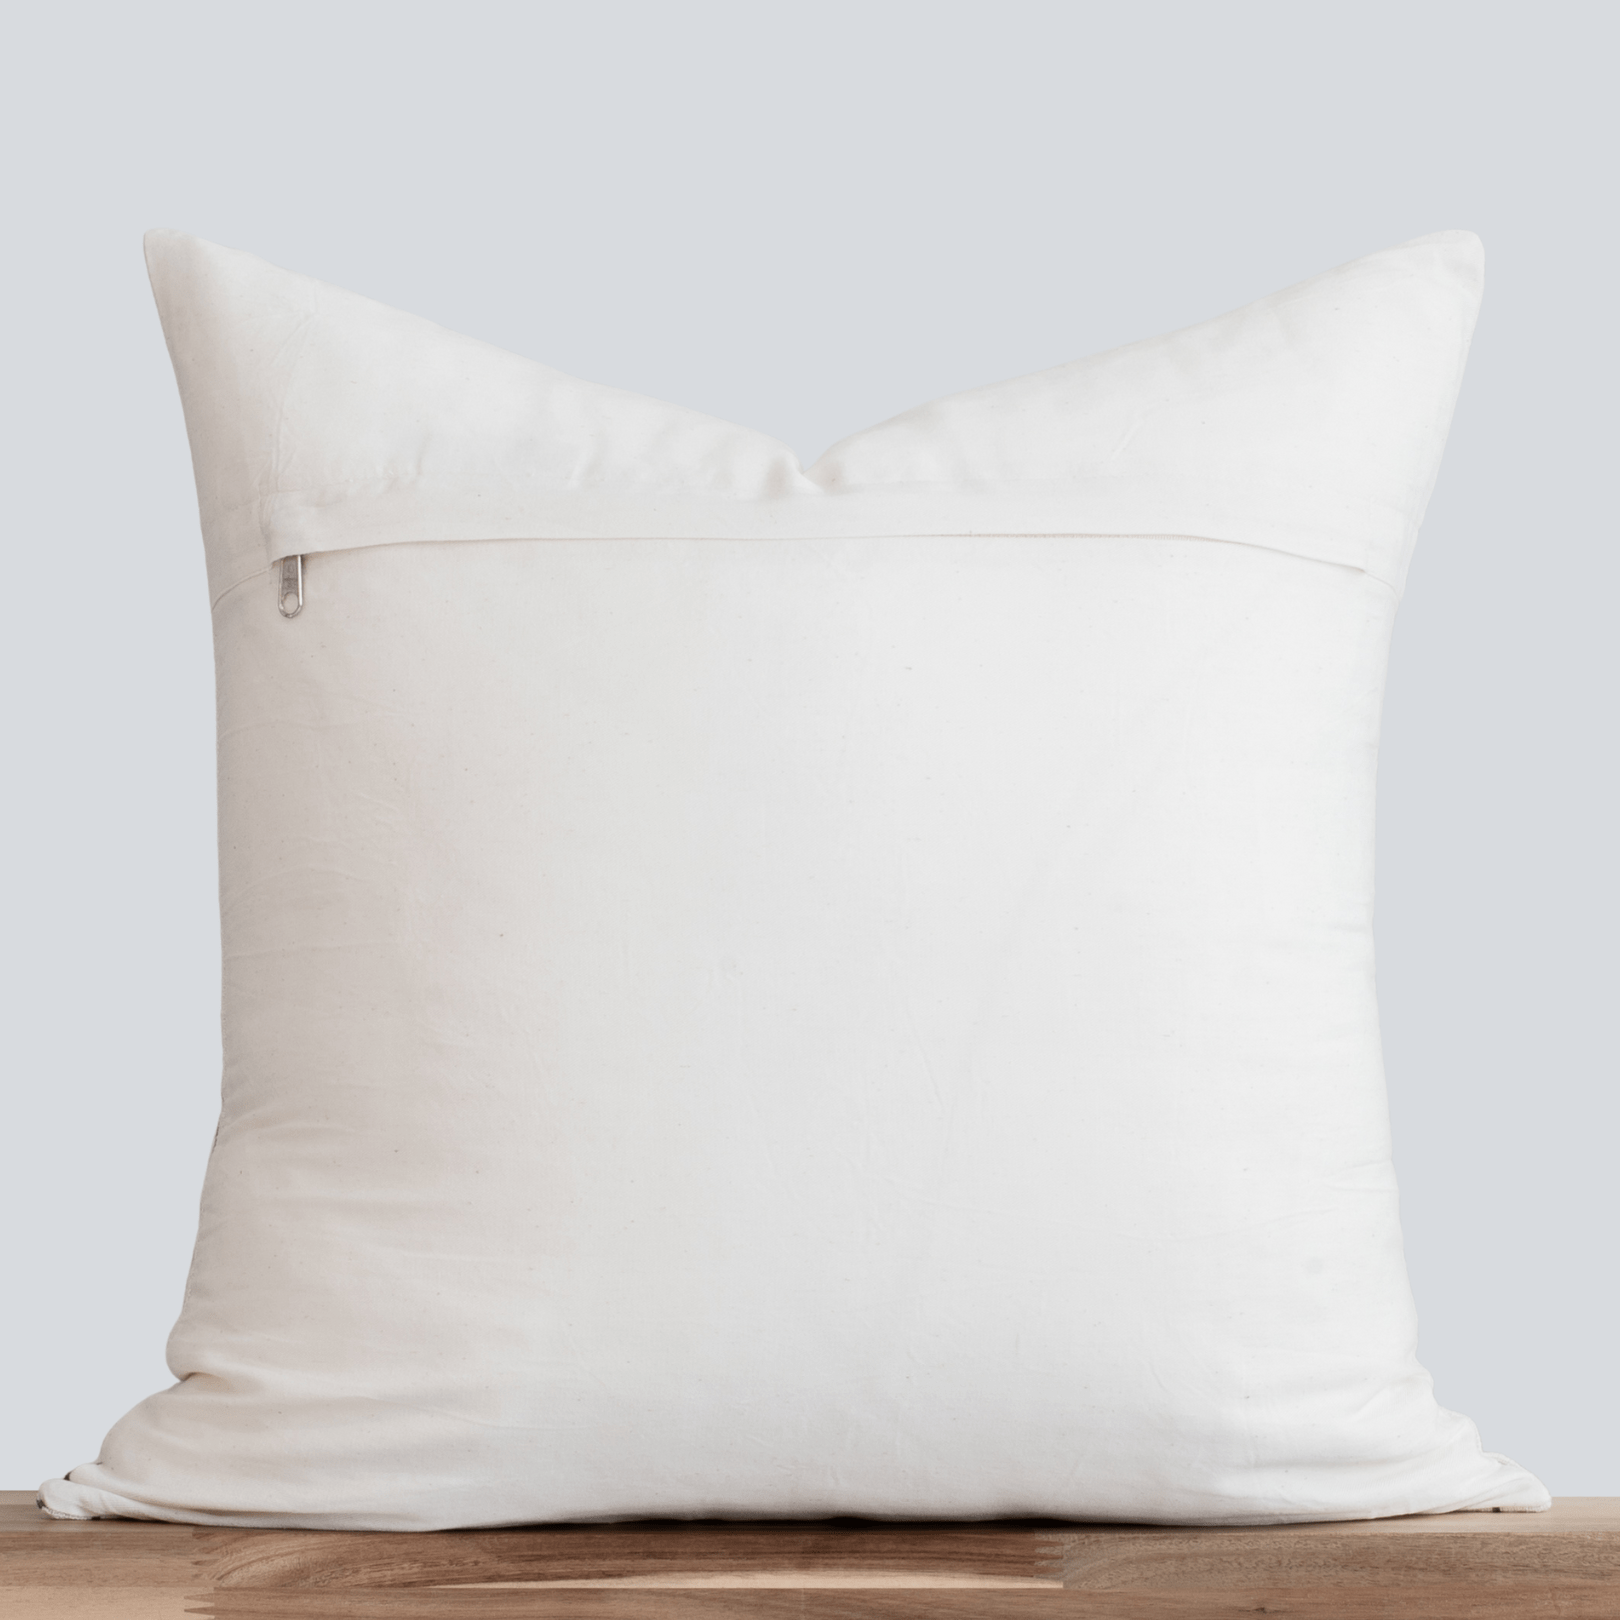 Throw Pillow and Blanket